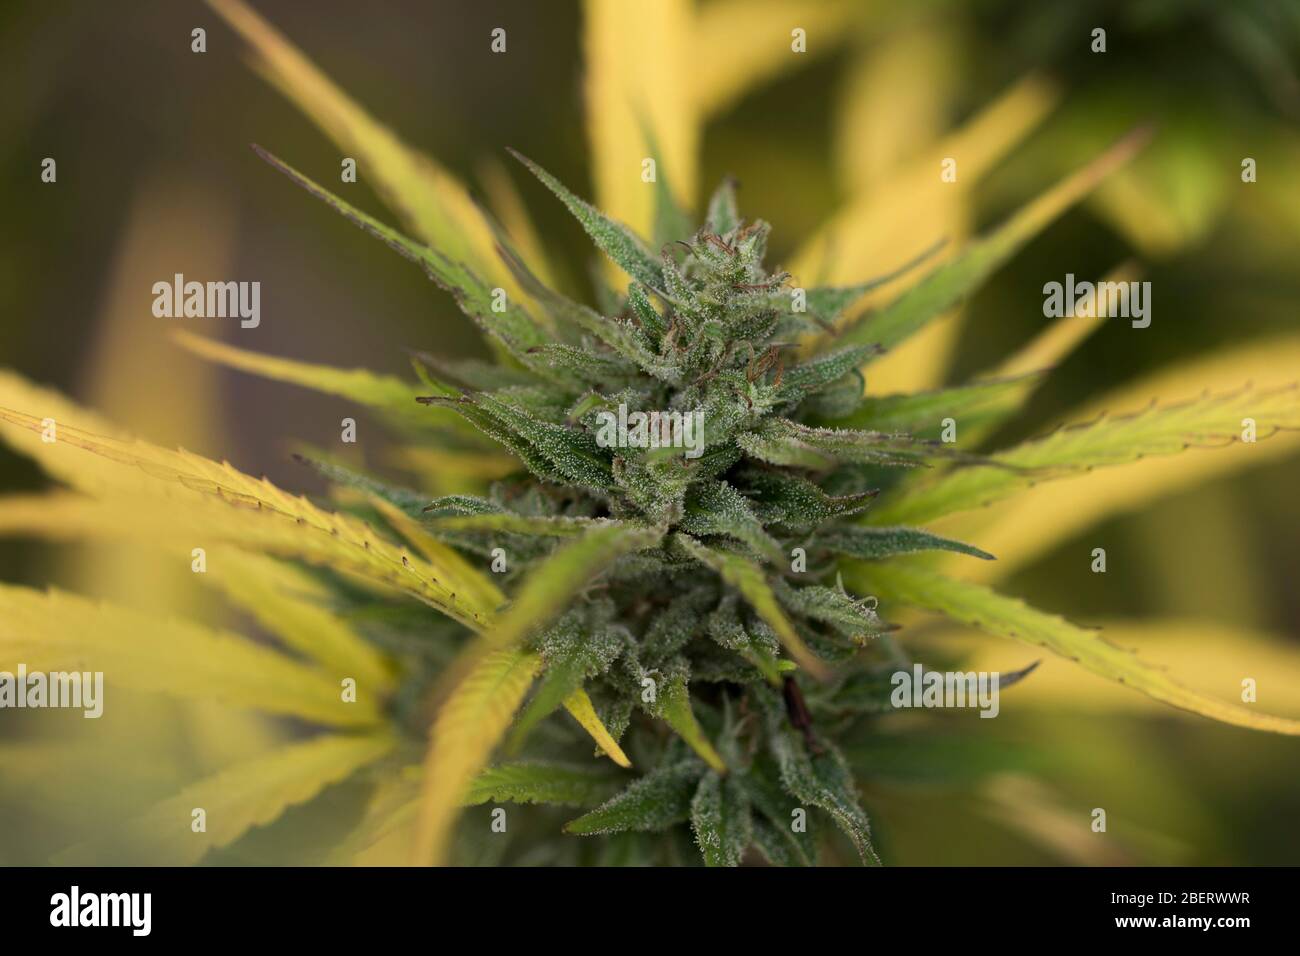 Marijuana plant leaves close up. Growing cannabis with THC and CBD for health and wellness. Large green marijuana plant leaves close up. Stock Photo